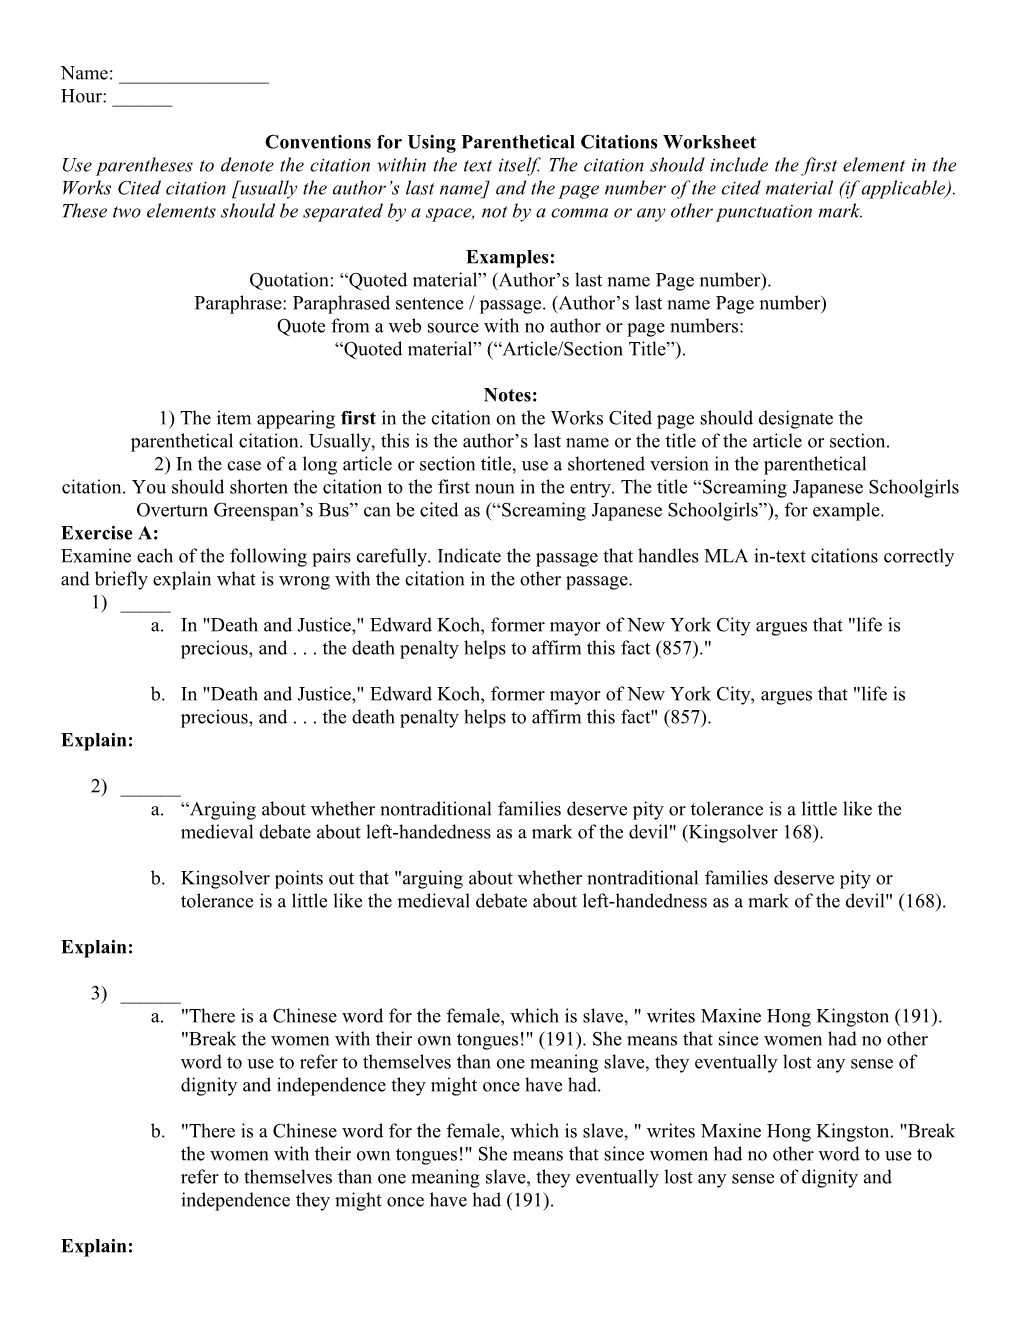 Conventions for Using Parenthetical Citations Worksheet